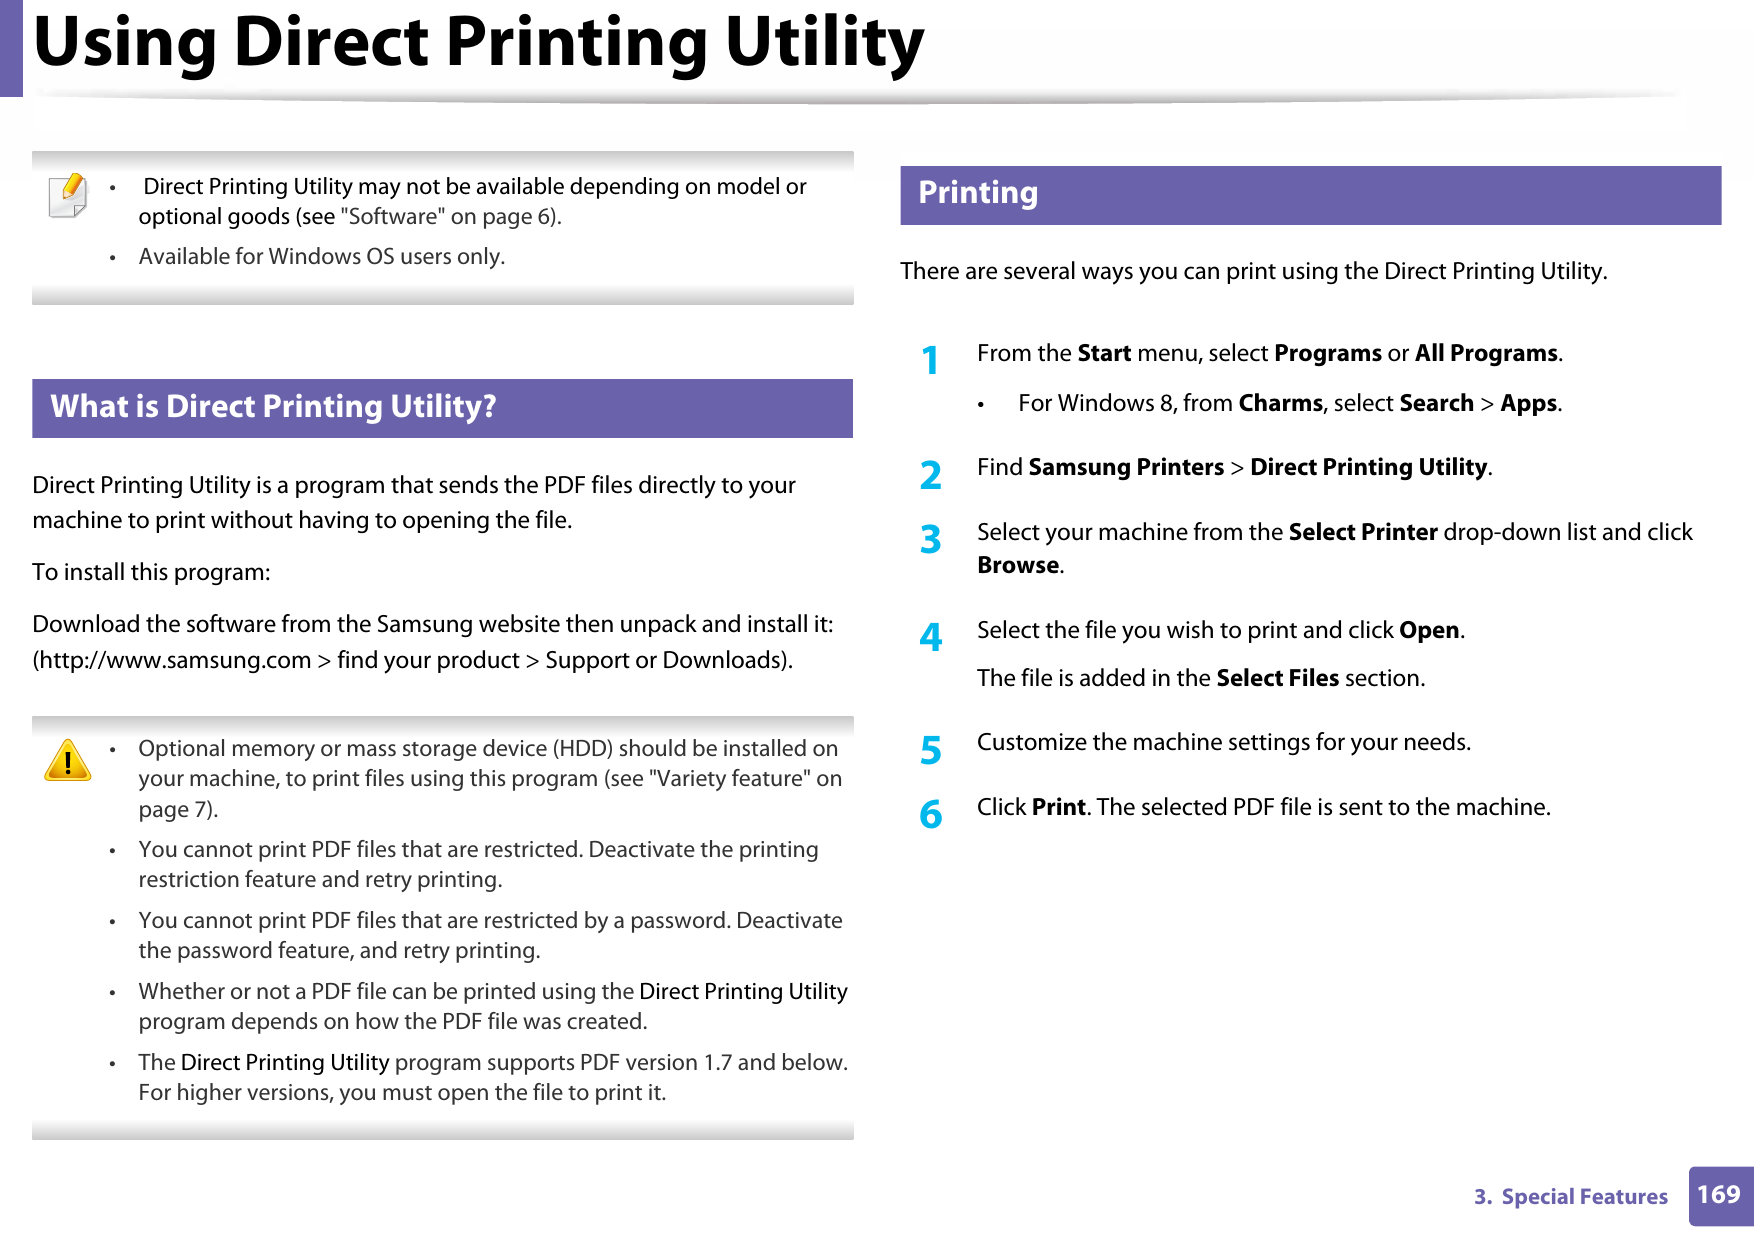 1693.  Special FeaturesUsing Direct Printing Utility • Direct Printing Utility may not be available depending on model or optional goods (see &quot;Software&quot; on page 6). • Available for Windows OS users only. 3 What is Direct Printing Utility?Direct Printing Utility is a program that sends the PDF files directly to your machine to print without having to opening the file.To install this program:Download the software from the Samsung website then unpack and install it: (http://www.samsung.com &gt; find your product &gt; Support or Downloads). • Optional memory or mass storage device (HDD) should be installed on your machine, to print files using this program (see &quot;Variety feature&quot; on page 7).• You cannot print PDF files that are restricted. Deactivate the printing restriction feature and retry printing.• You cannot print PDF files that are restricted by a password. Deactivate the password feature, and retry printing.• Whether or not a PDF file can be printed using the Direct Printing Utility program depends on how the PDF file was created.• The Direct Printing Utility program supports PDF version 1.7 and below. For higher versions, you must open the file to print it. 4 PrintingThere are several ways you can print using the Direct Printing Utility.1From the Start menu, select Programs or All Programs.• For Windows 8, from Charms, select Search &gt; Apps.2  Find Samsung Printers &gt; Direct Printing Utility.3  Select your machine from the Select Printer drop-down list and click Browse.4  Select the file you wish to print and click Open.The file is added in the Select Files section.5  Customize the machine settings for your needs. 6  Click Print. The selected PDF file is sent to the machine.